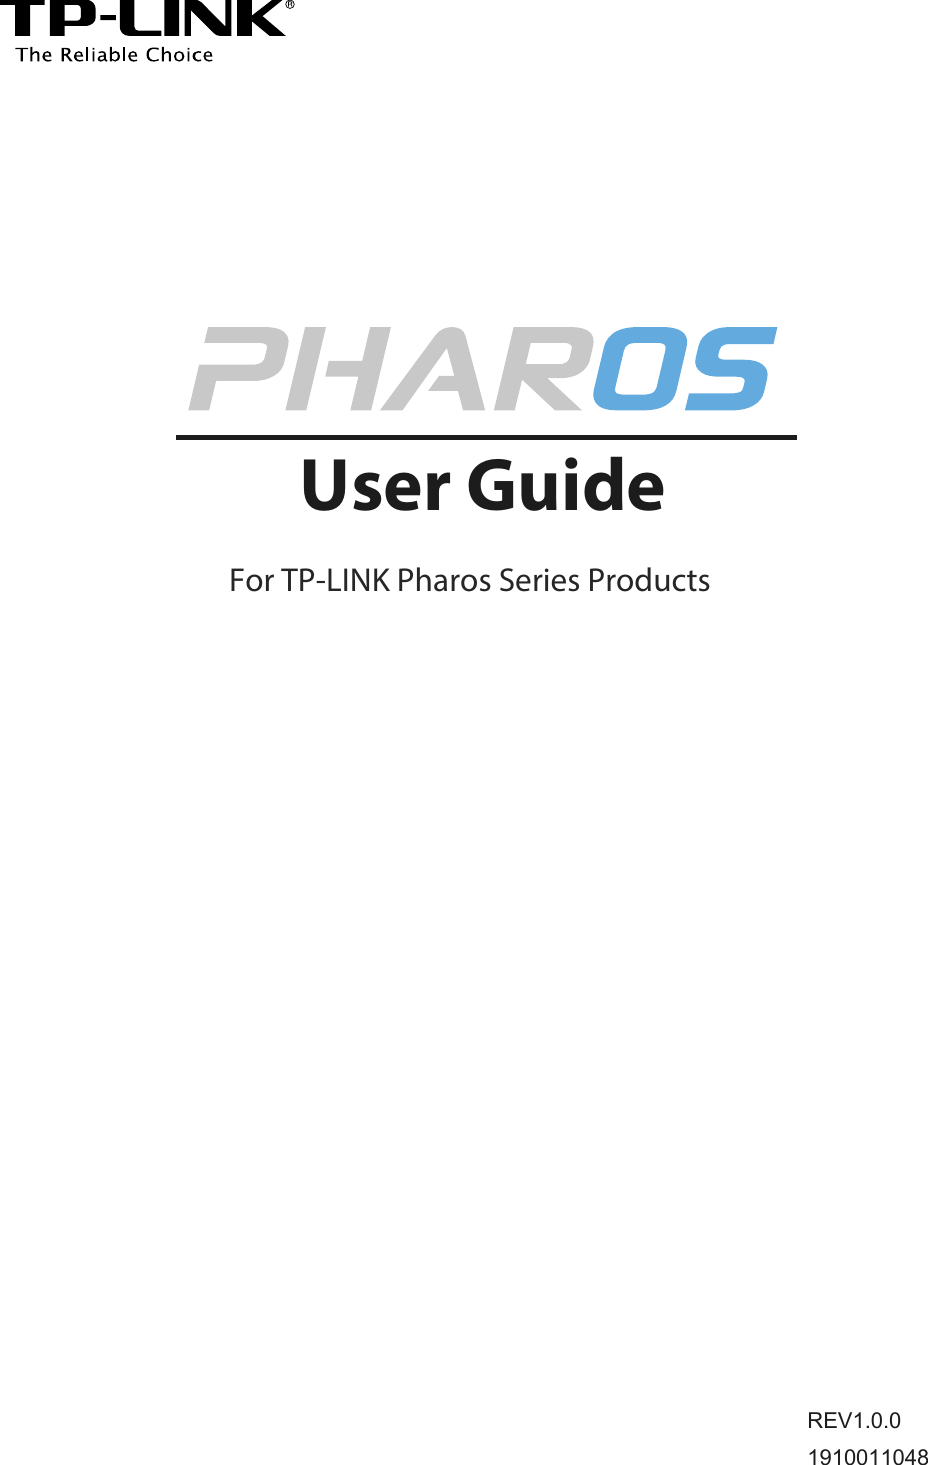       For TP-LINK Pharos Series Products      REV1.0.0 1910011048  User Guide  